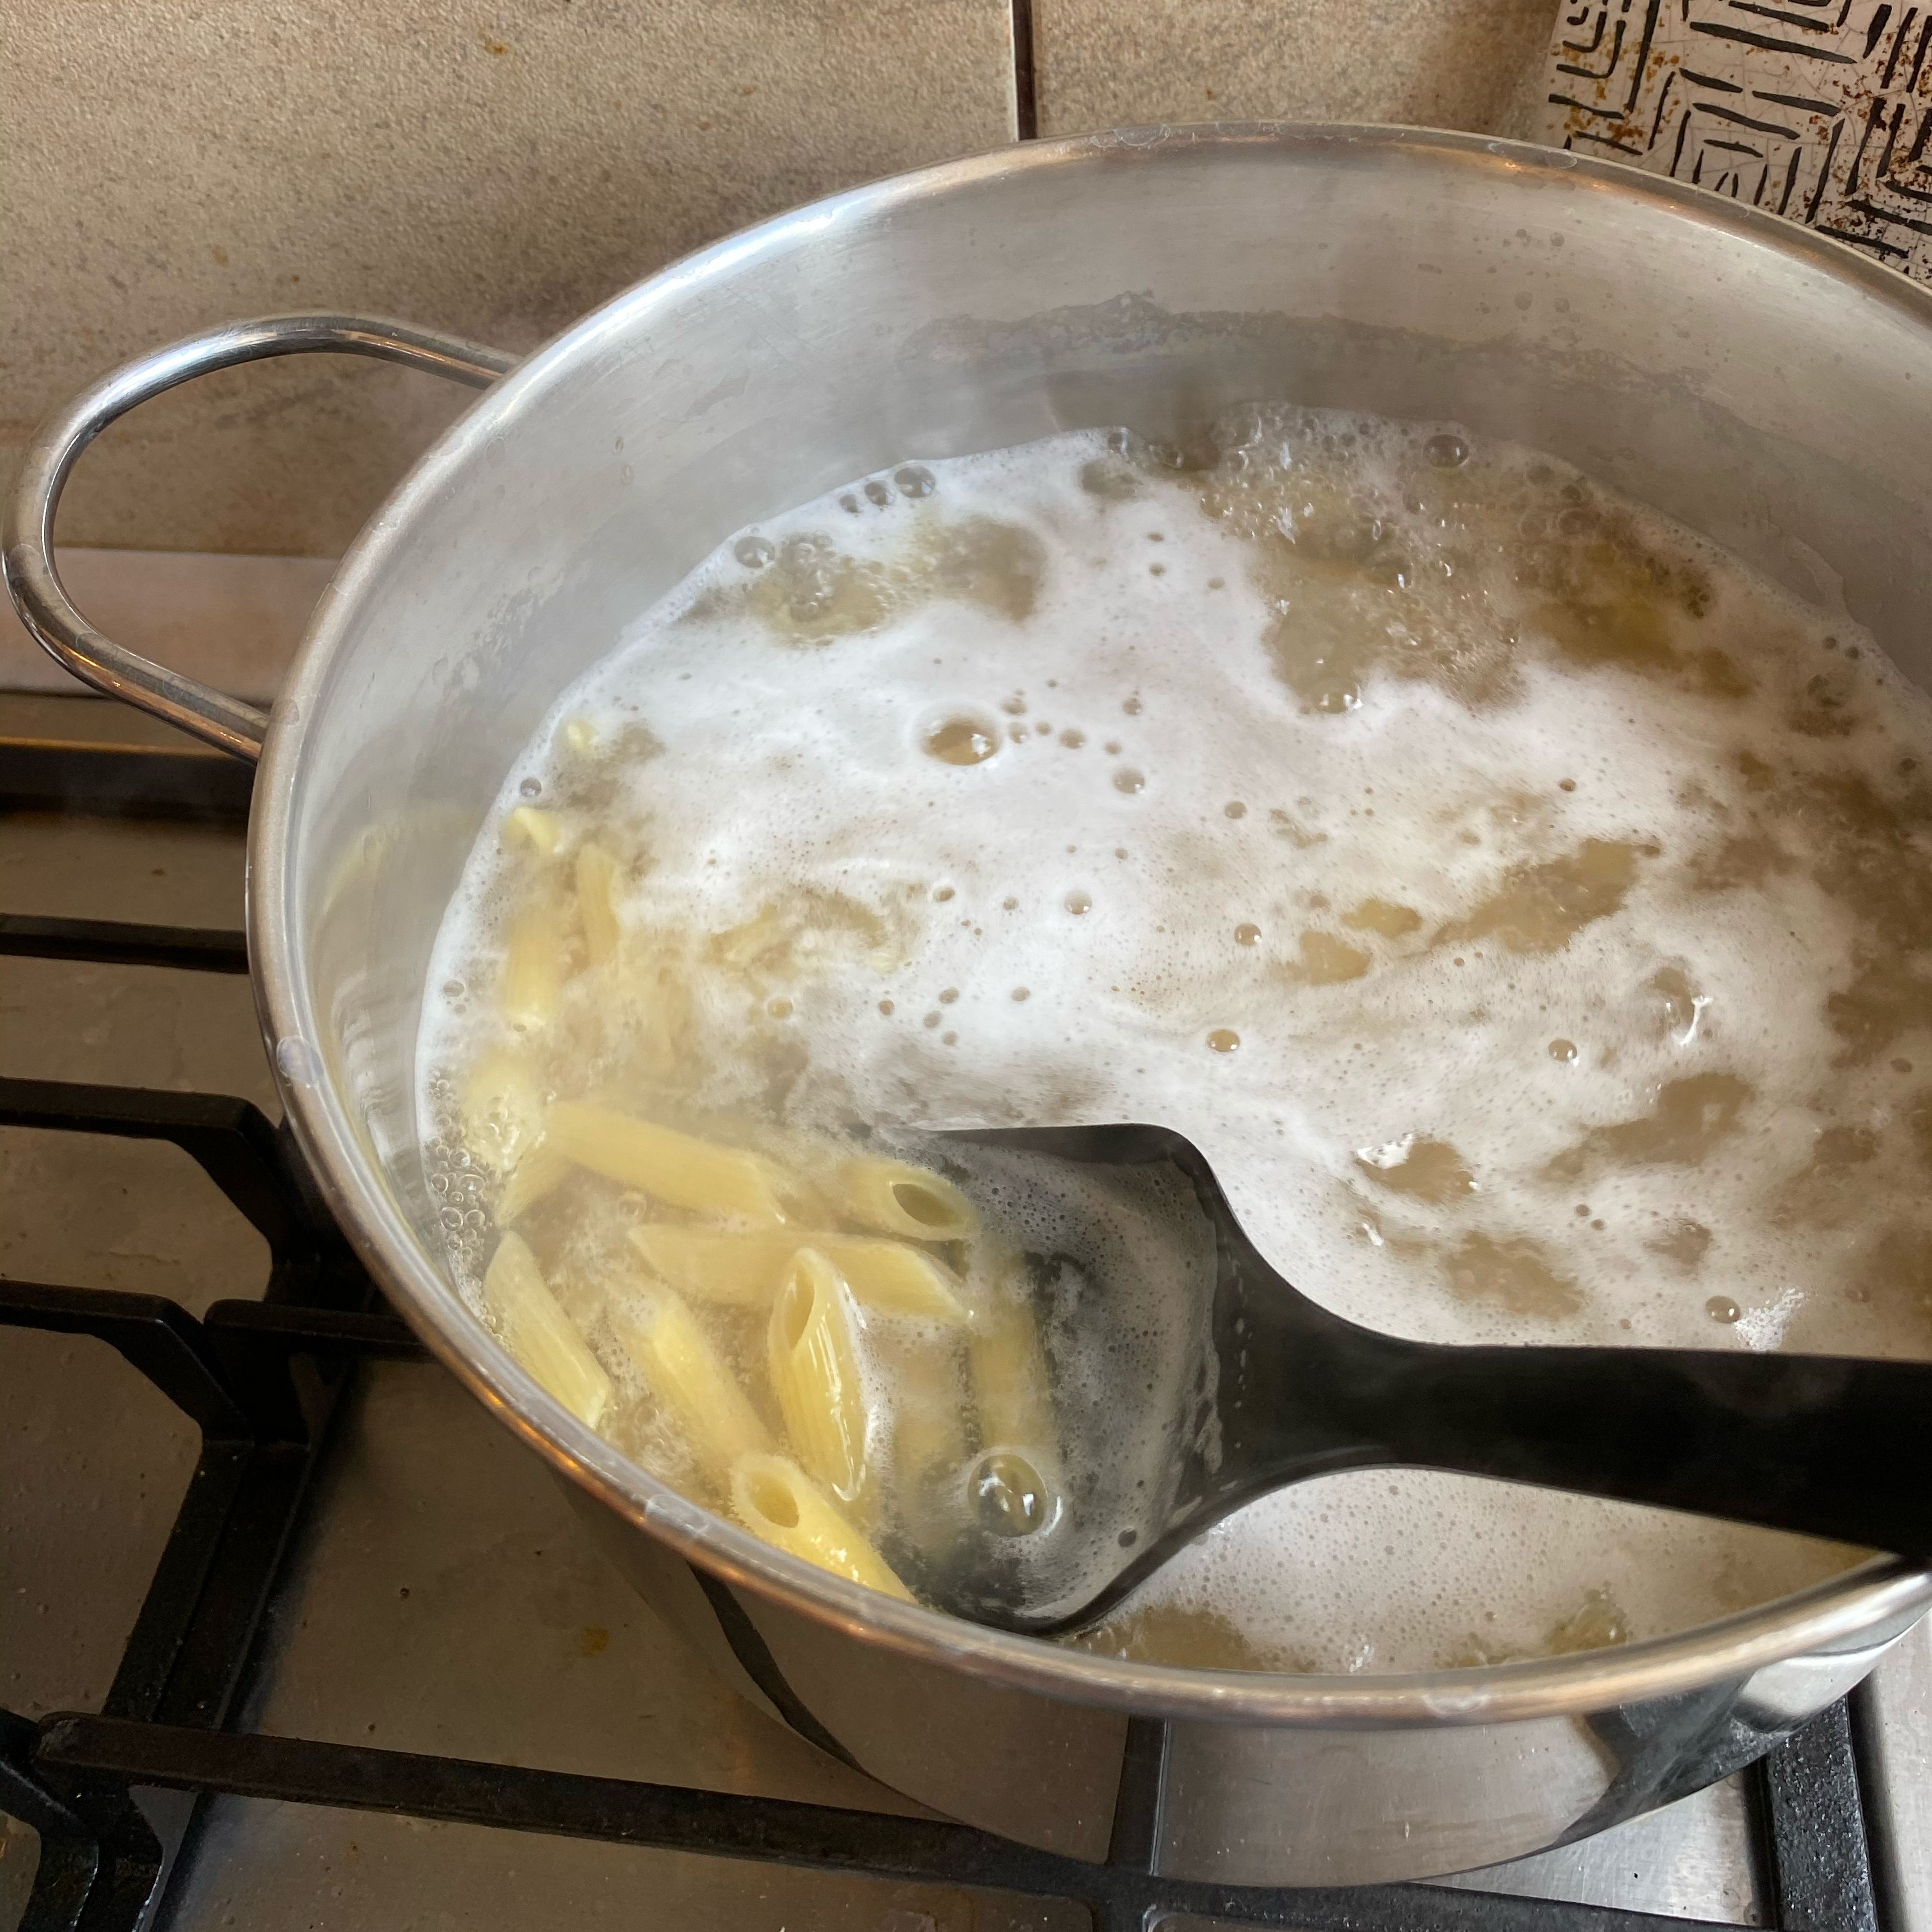 In the meantime, add the pasta to salted boiling water and cook for 11 min. Keep a cup of pasta water to add to the sauce later. (It will make it creamy)